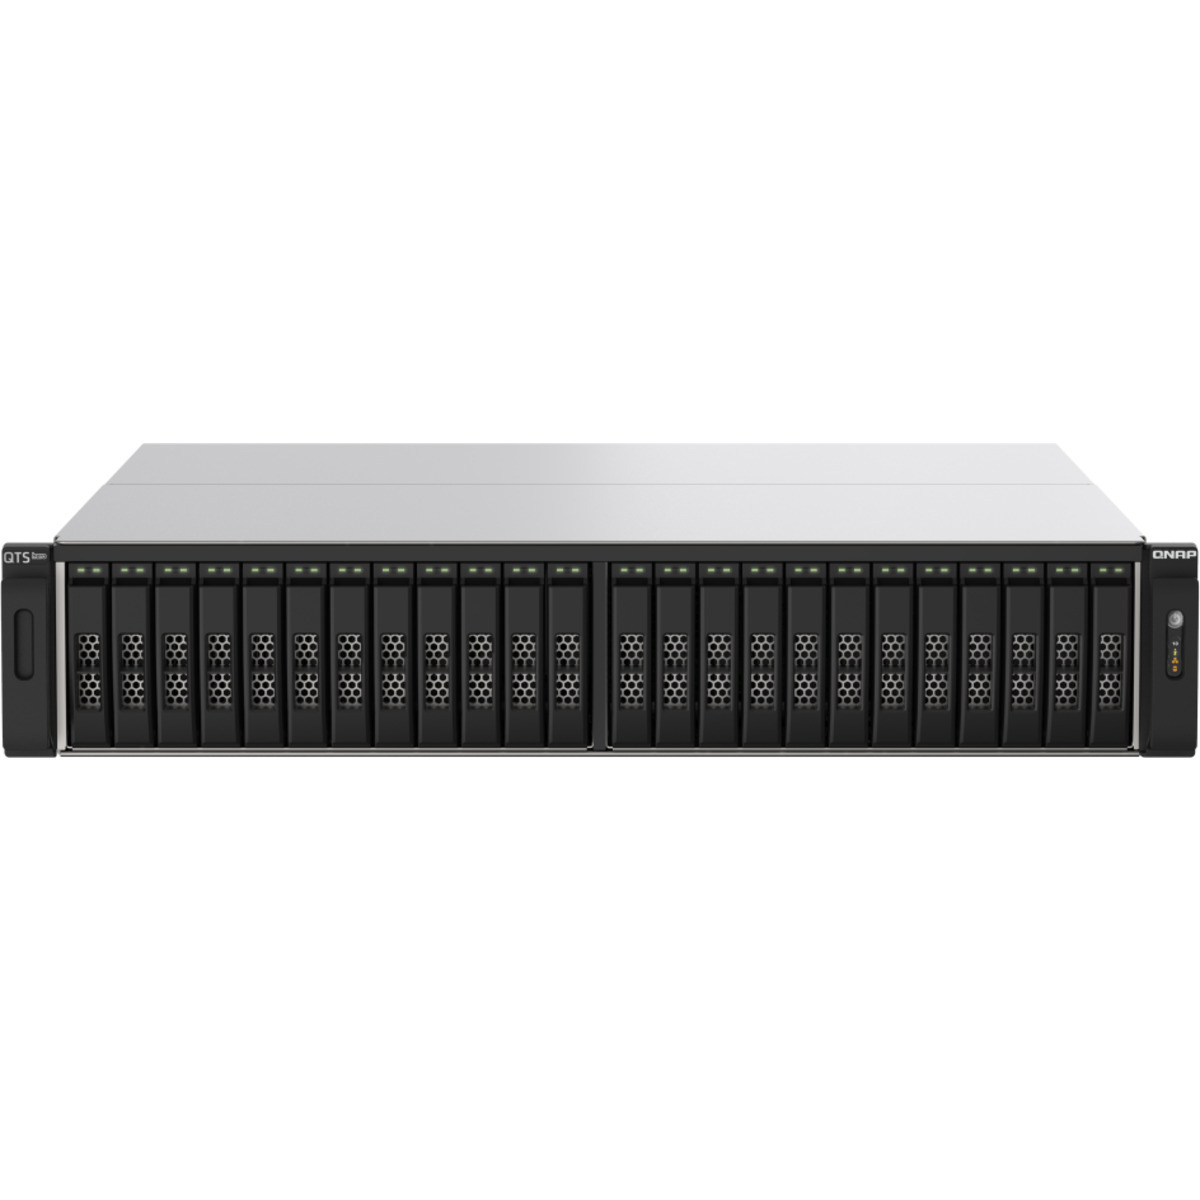 QNAP TS-h2490FU-7302P 20tb 24-Bay RackMount Large Business / Enterprise NAS - Network Attached Storage Device 20x1tb Sabrent Rocket 4 Plus SB-RKT4P-1TB  7000/5800MB/s M.2 2280 NVMe SSD CONSUMER Class Drives Installed - Burn-In Tested TS-h2490FU-7302P